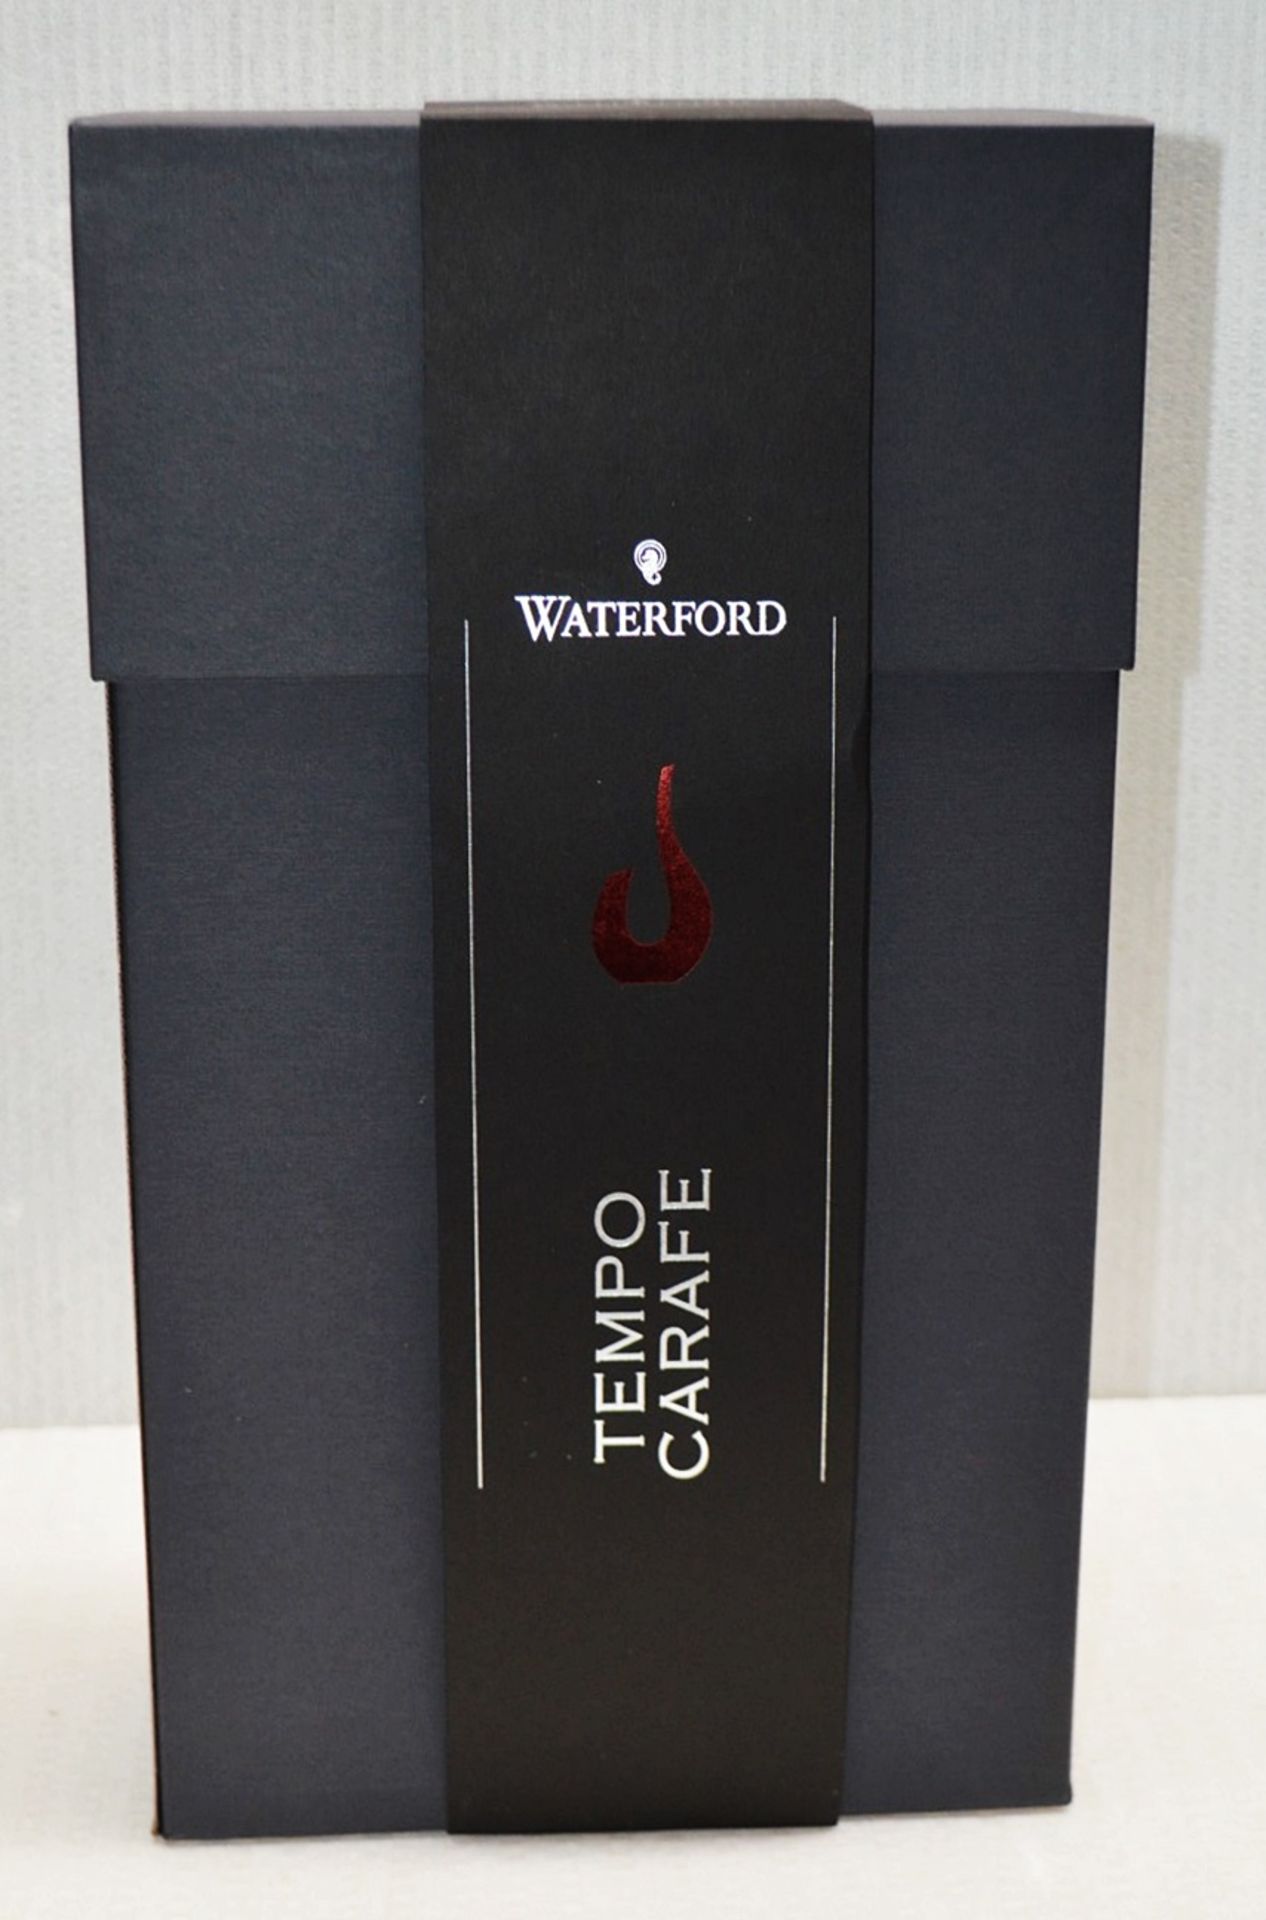 1 x Waterford 'Elegance Tempo' Decanter / Carafe - Ref: HHW77/JUL21 - CL011 - Location: Altrincham - Image 8 of 8